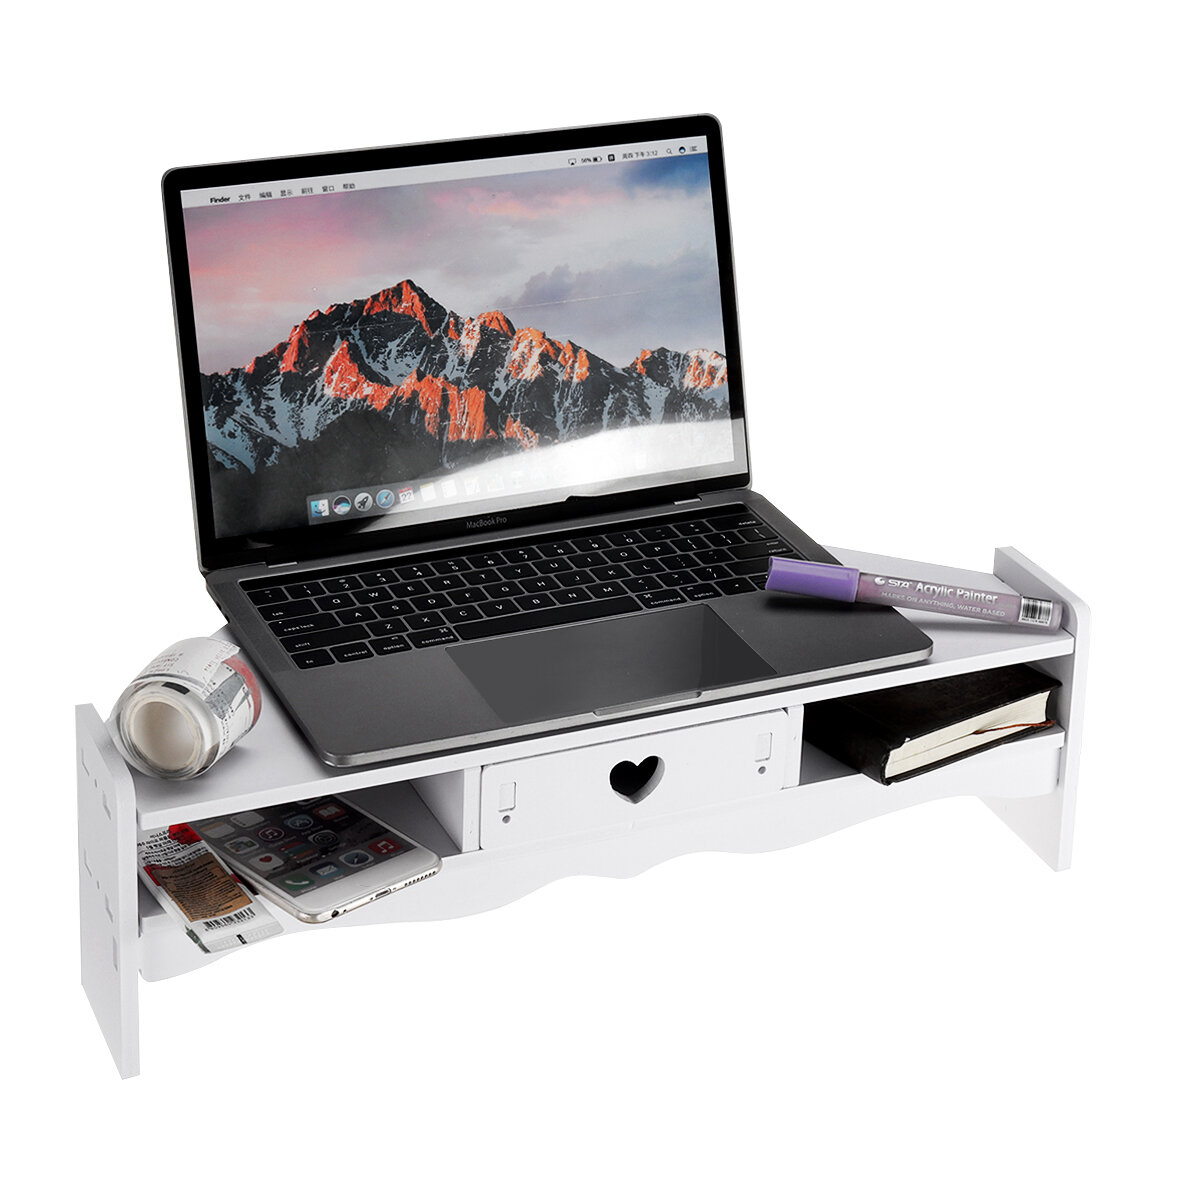 Computer Monitor Riser Laptop PC Stand Home Office Table Storage Organizer Shelf